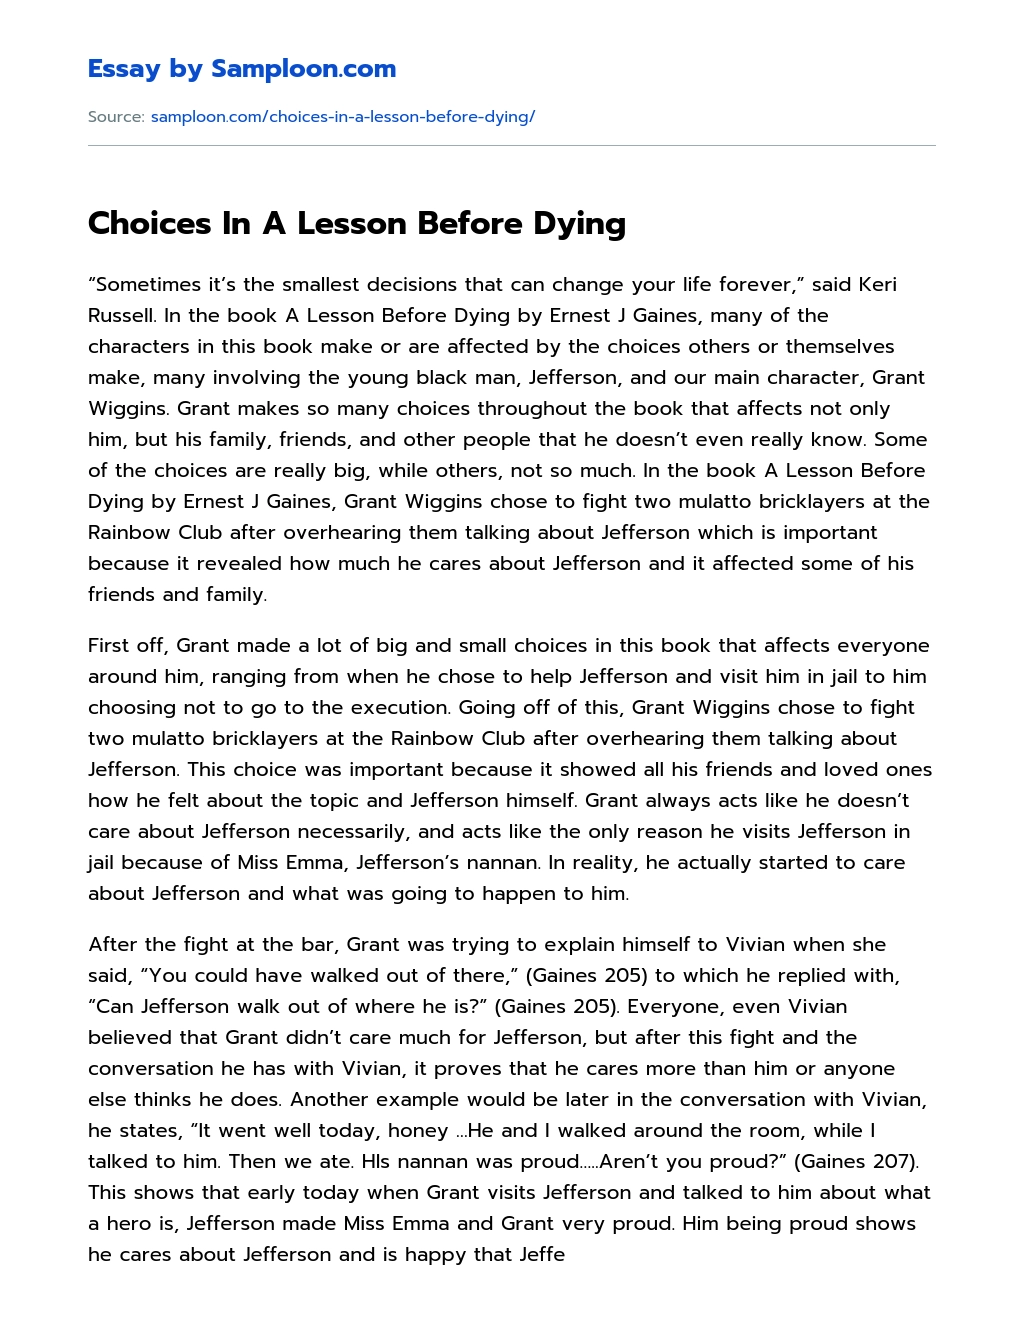 Choices In A Lesson Before Dying essay